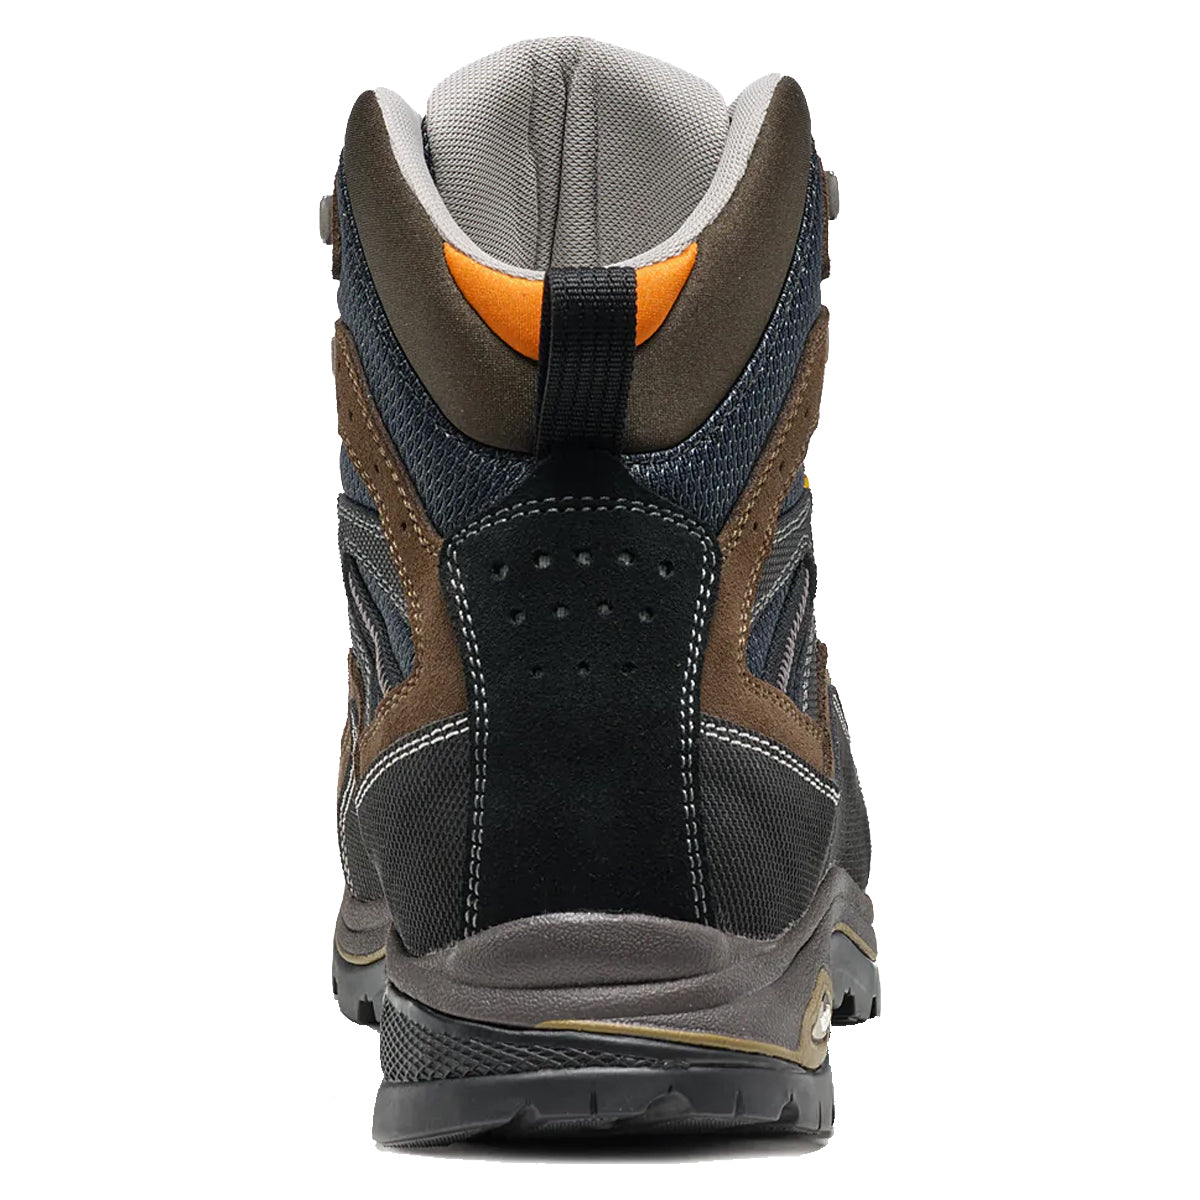 Asolo Drifter I GV Evo in Dark Brown & Brown by GOHUNT | Asolo - GOHUNT Shop